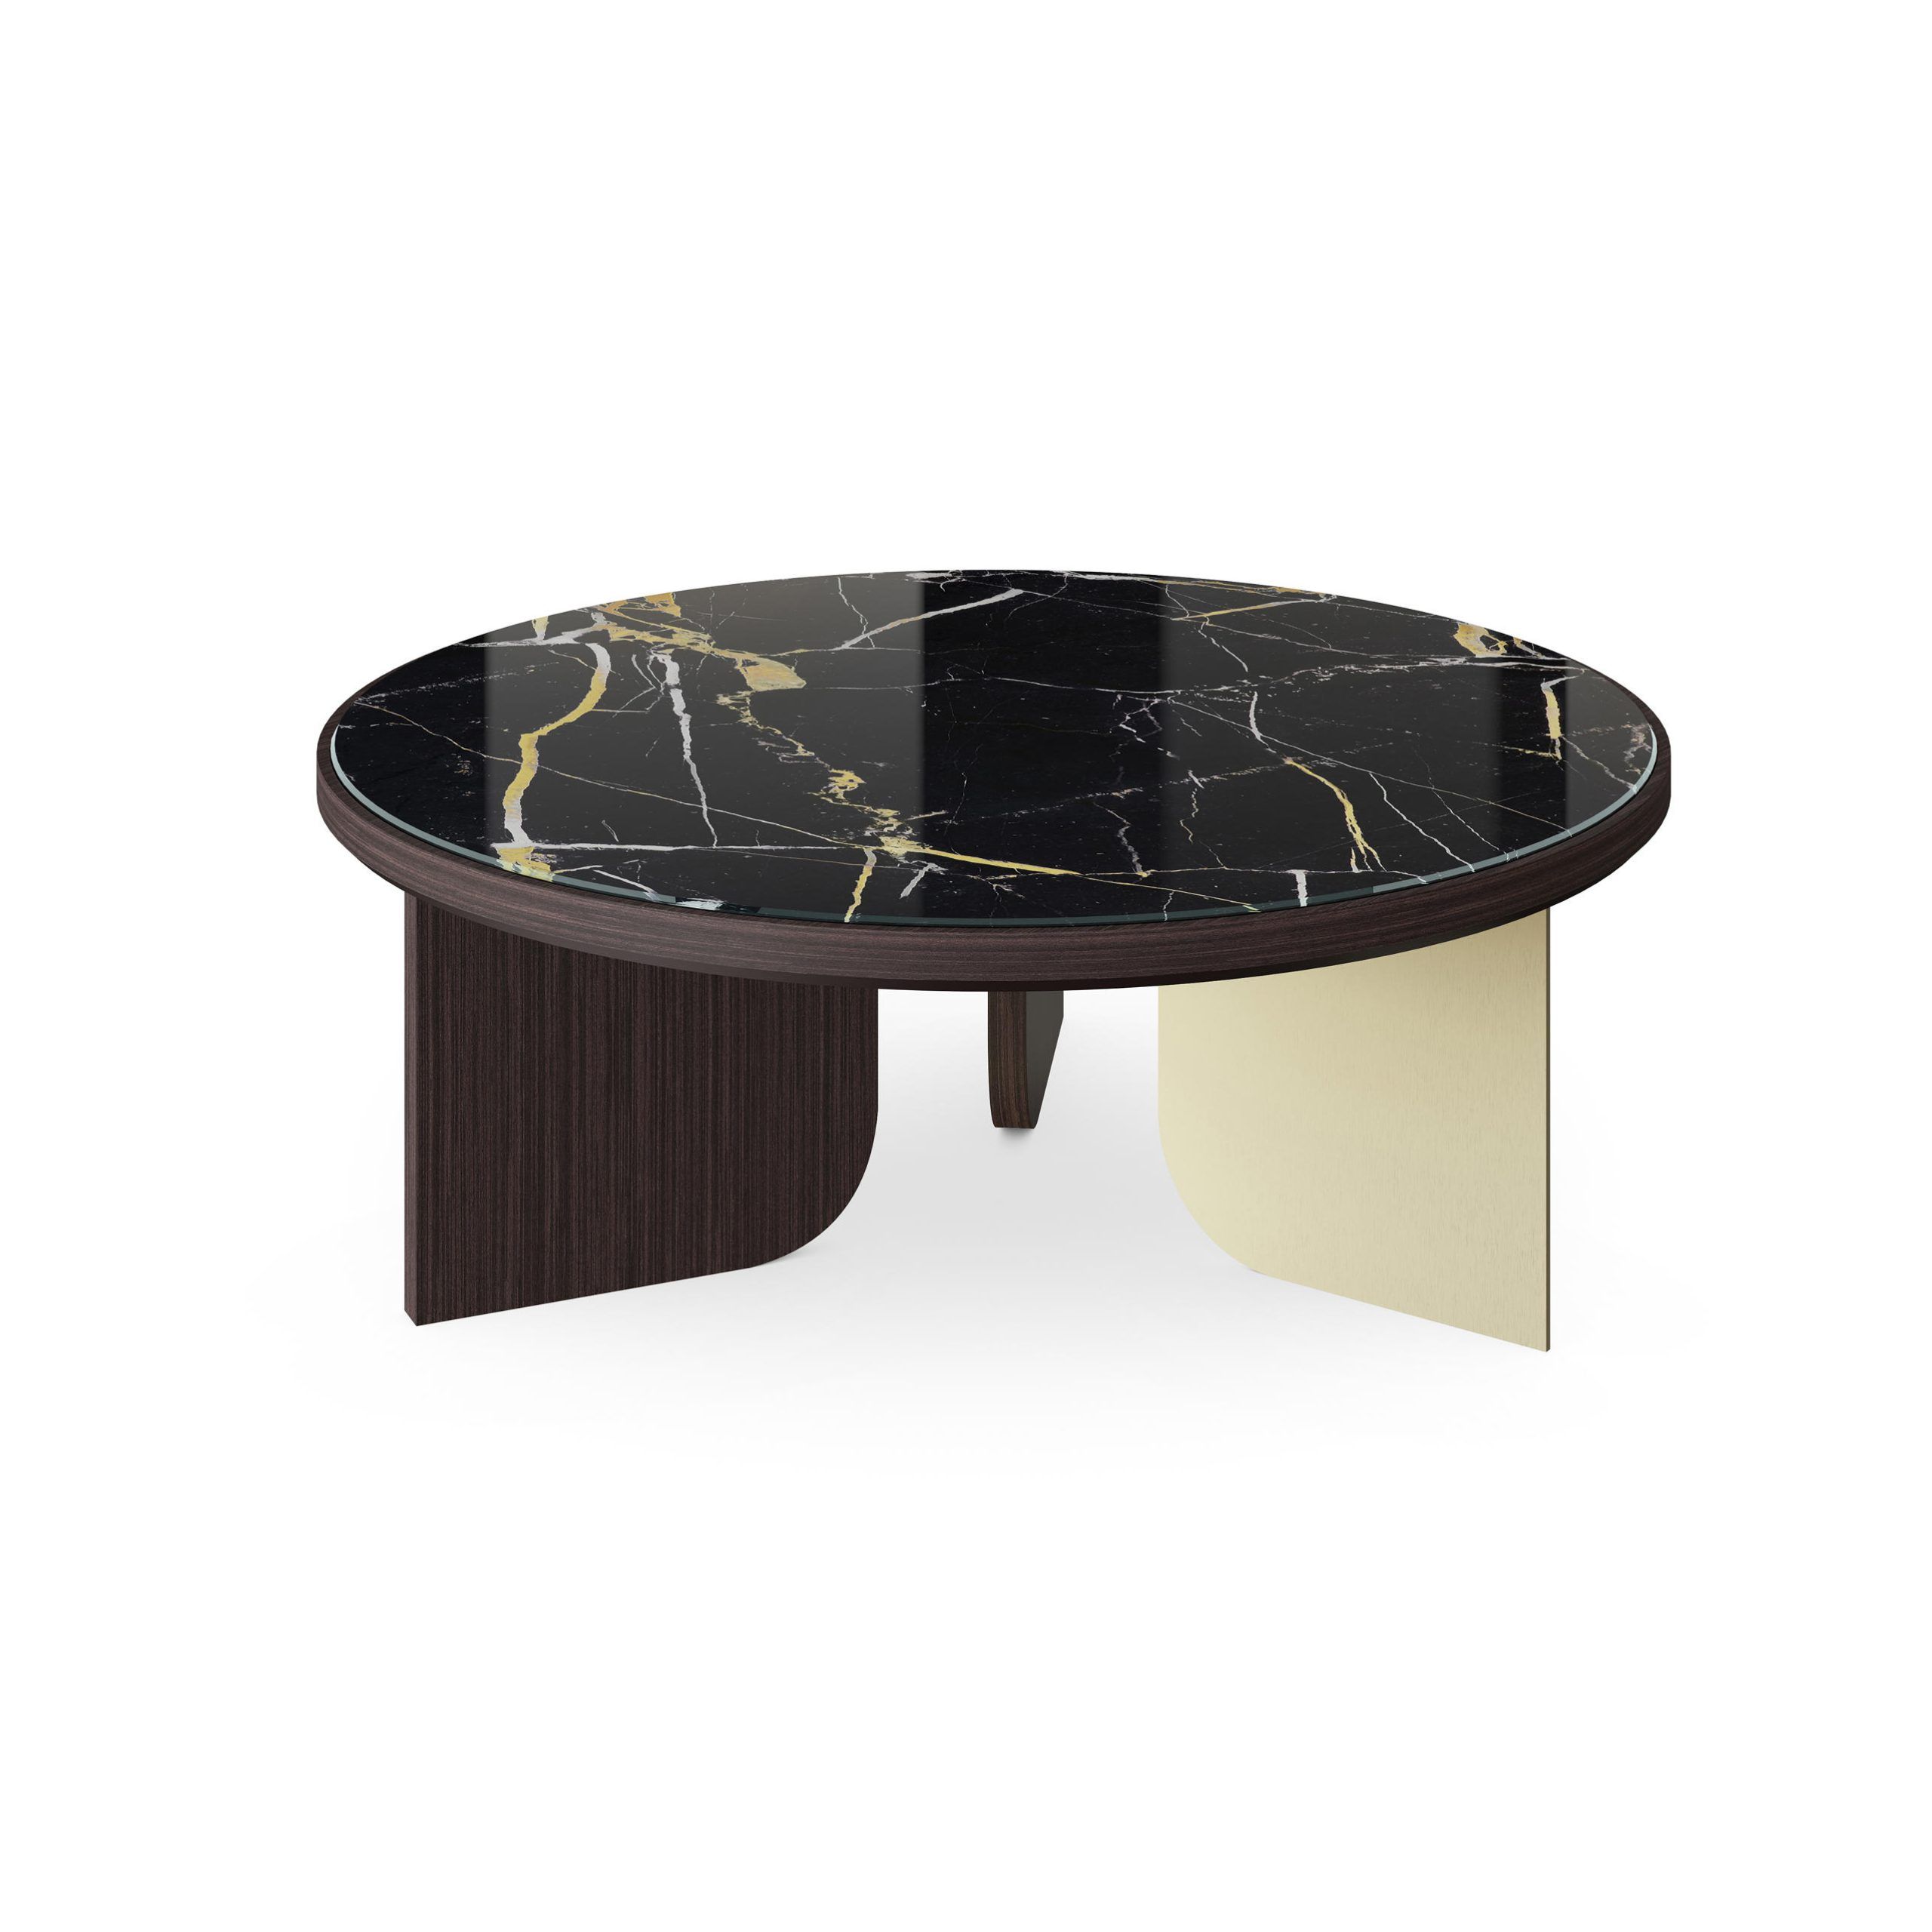 Liam Coffee Table & Designer Furniture | Architonic Within Liam Round Plaster Coffee Tables (Gallery 14 of 20)